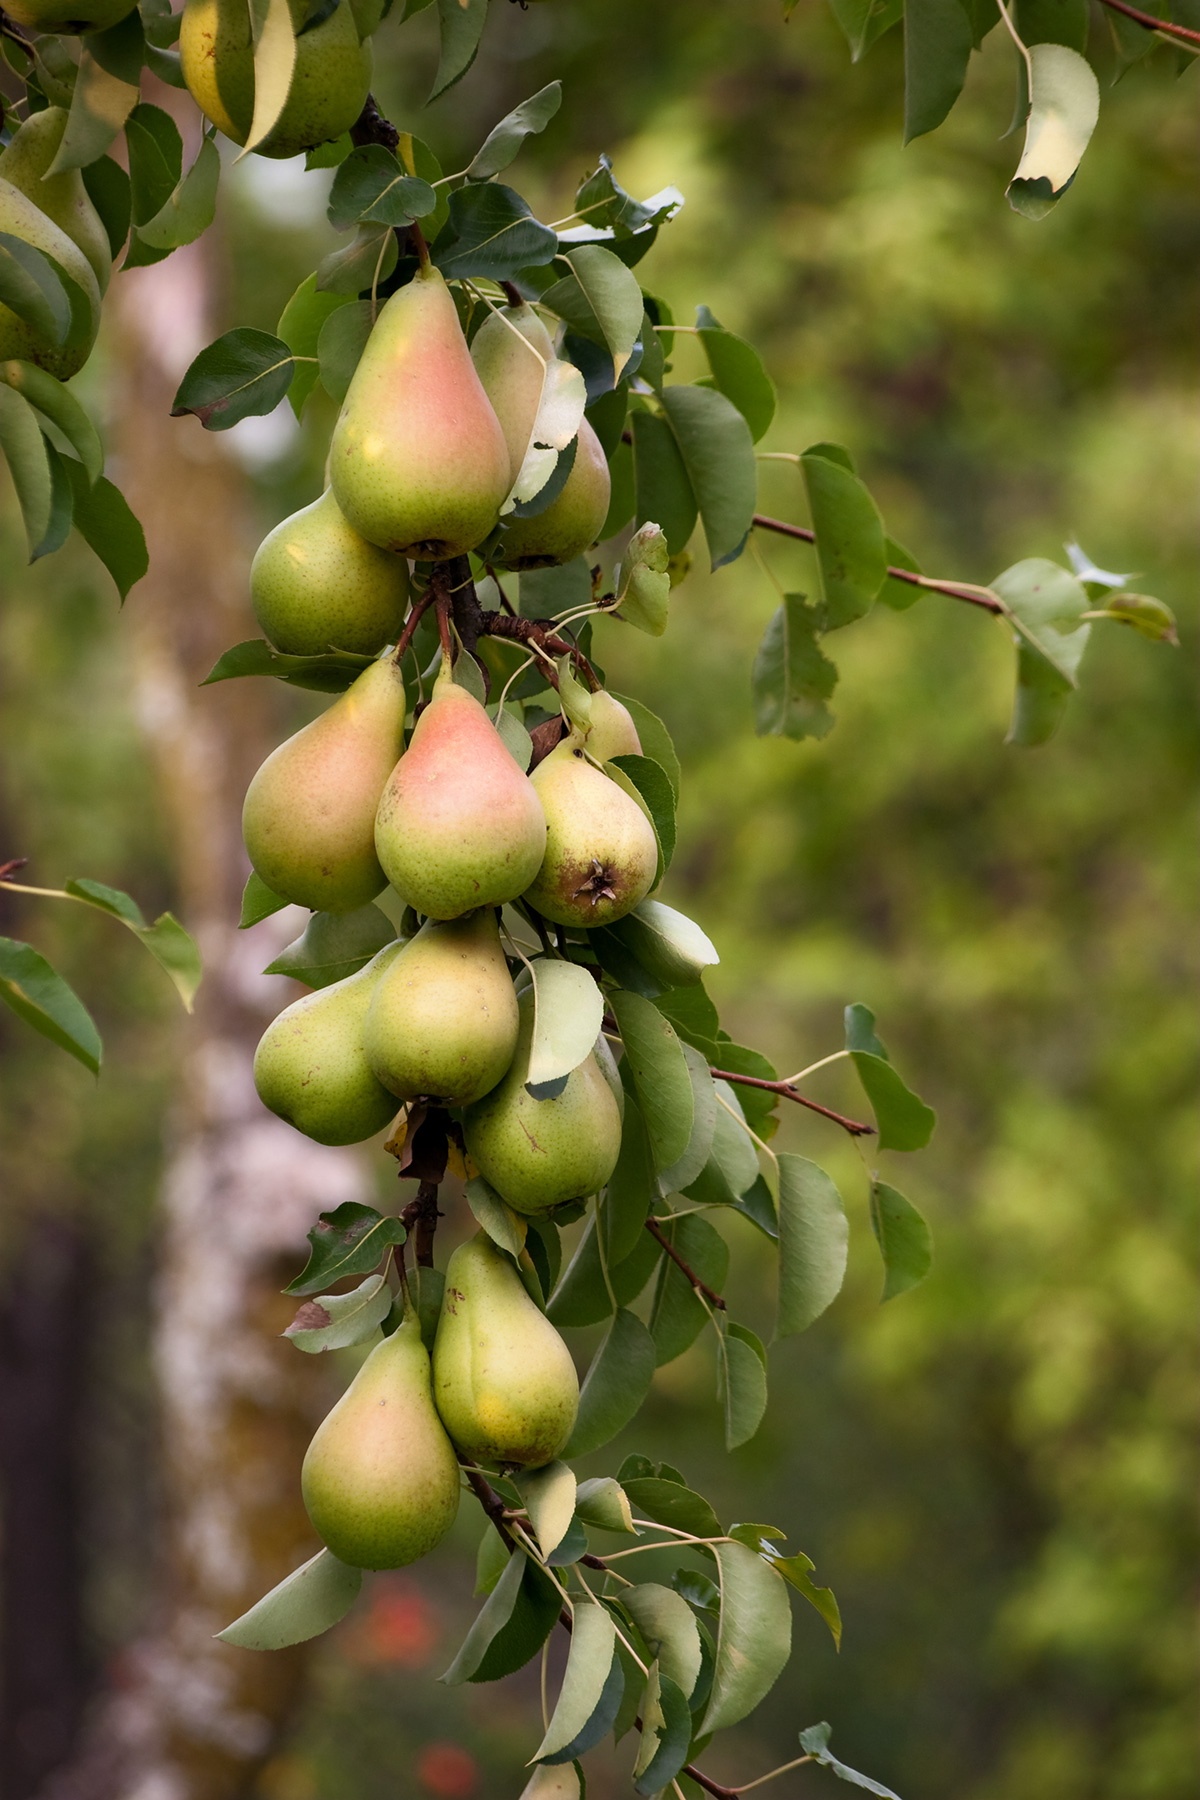 Pears in the tree